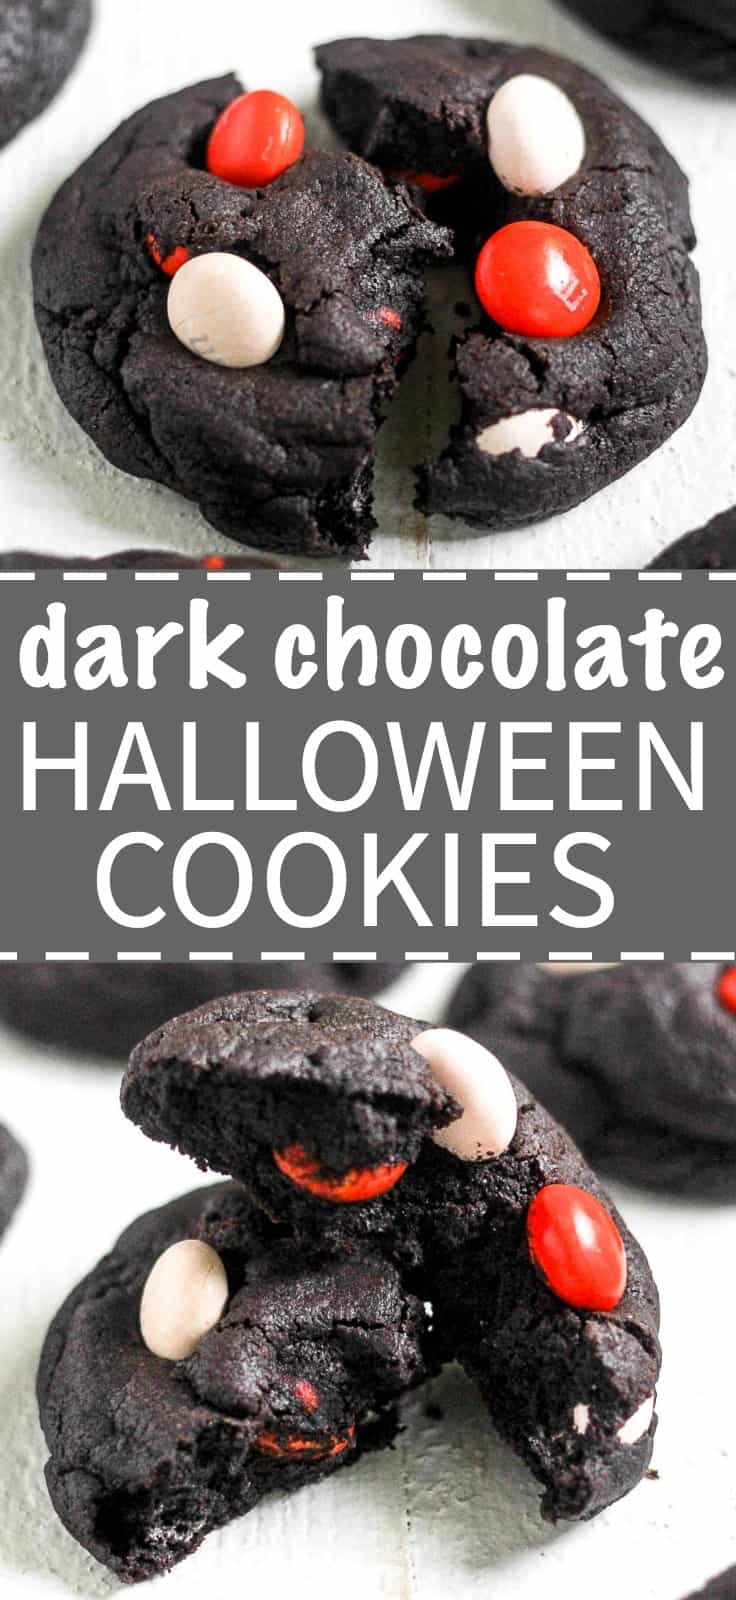 Get ready for your spooky celebration! These Dark Chocolate Halloween Cookies are a great addition to any party spread. They're soft, chewy, filled with chocolate and decorated with festive candy. 